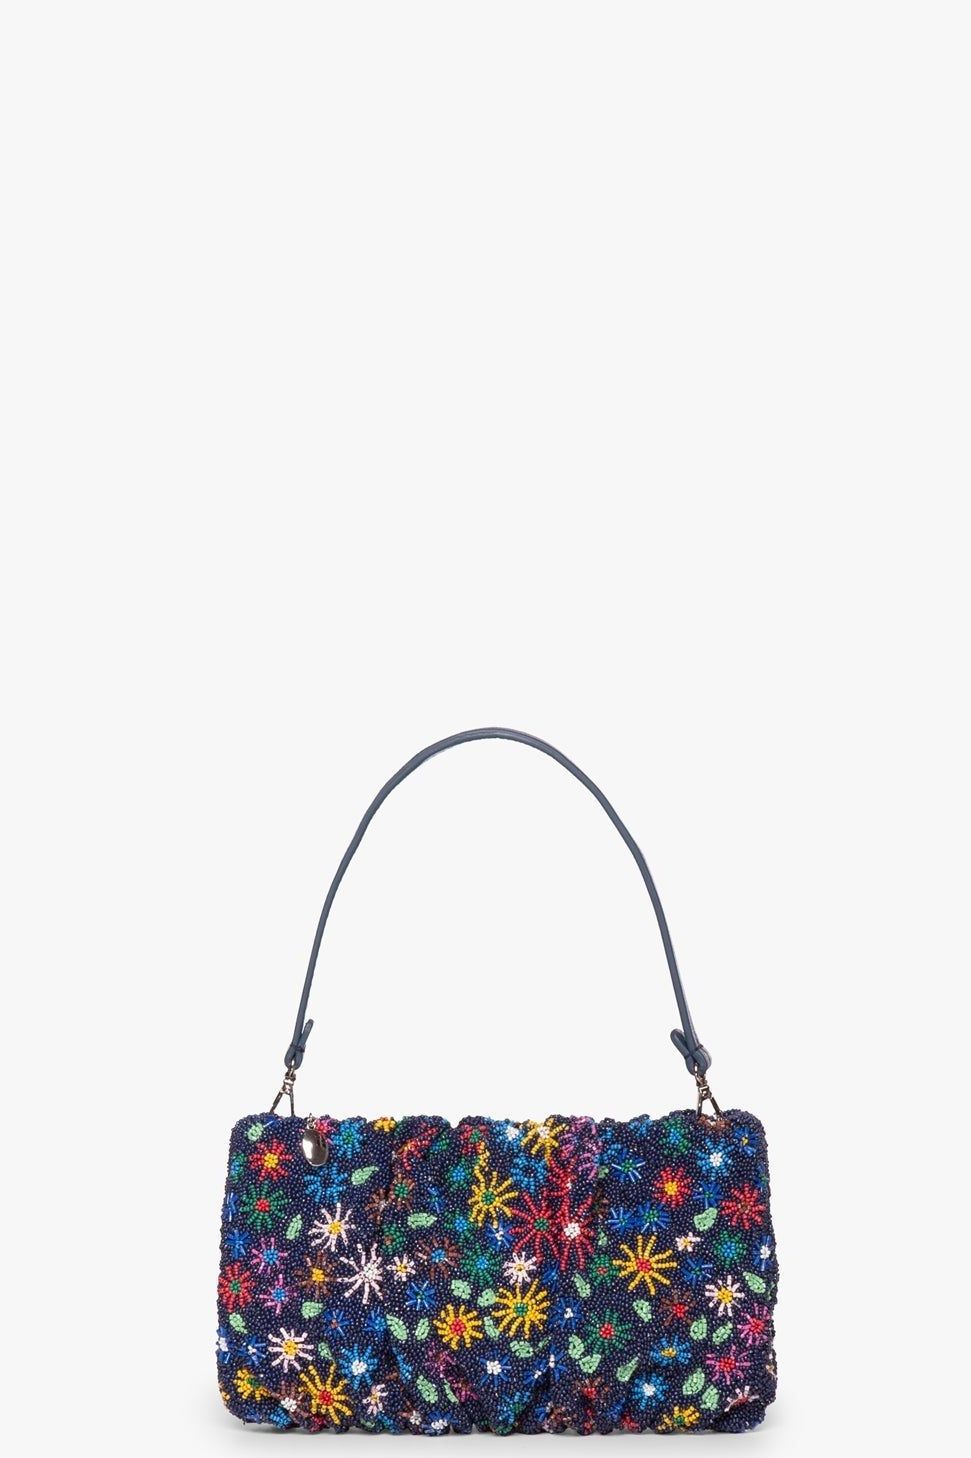 5 affordable alternatives to STAUD's Tommy Beaded Bag